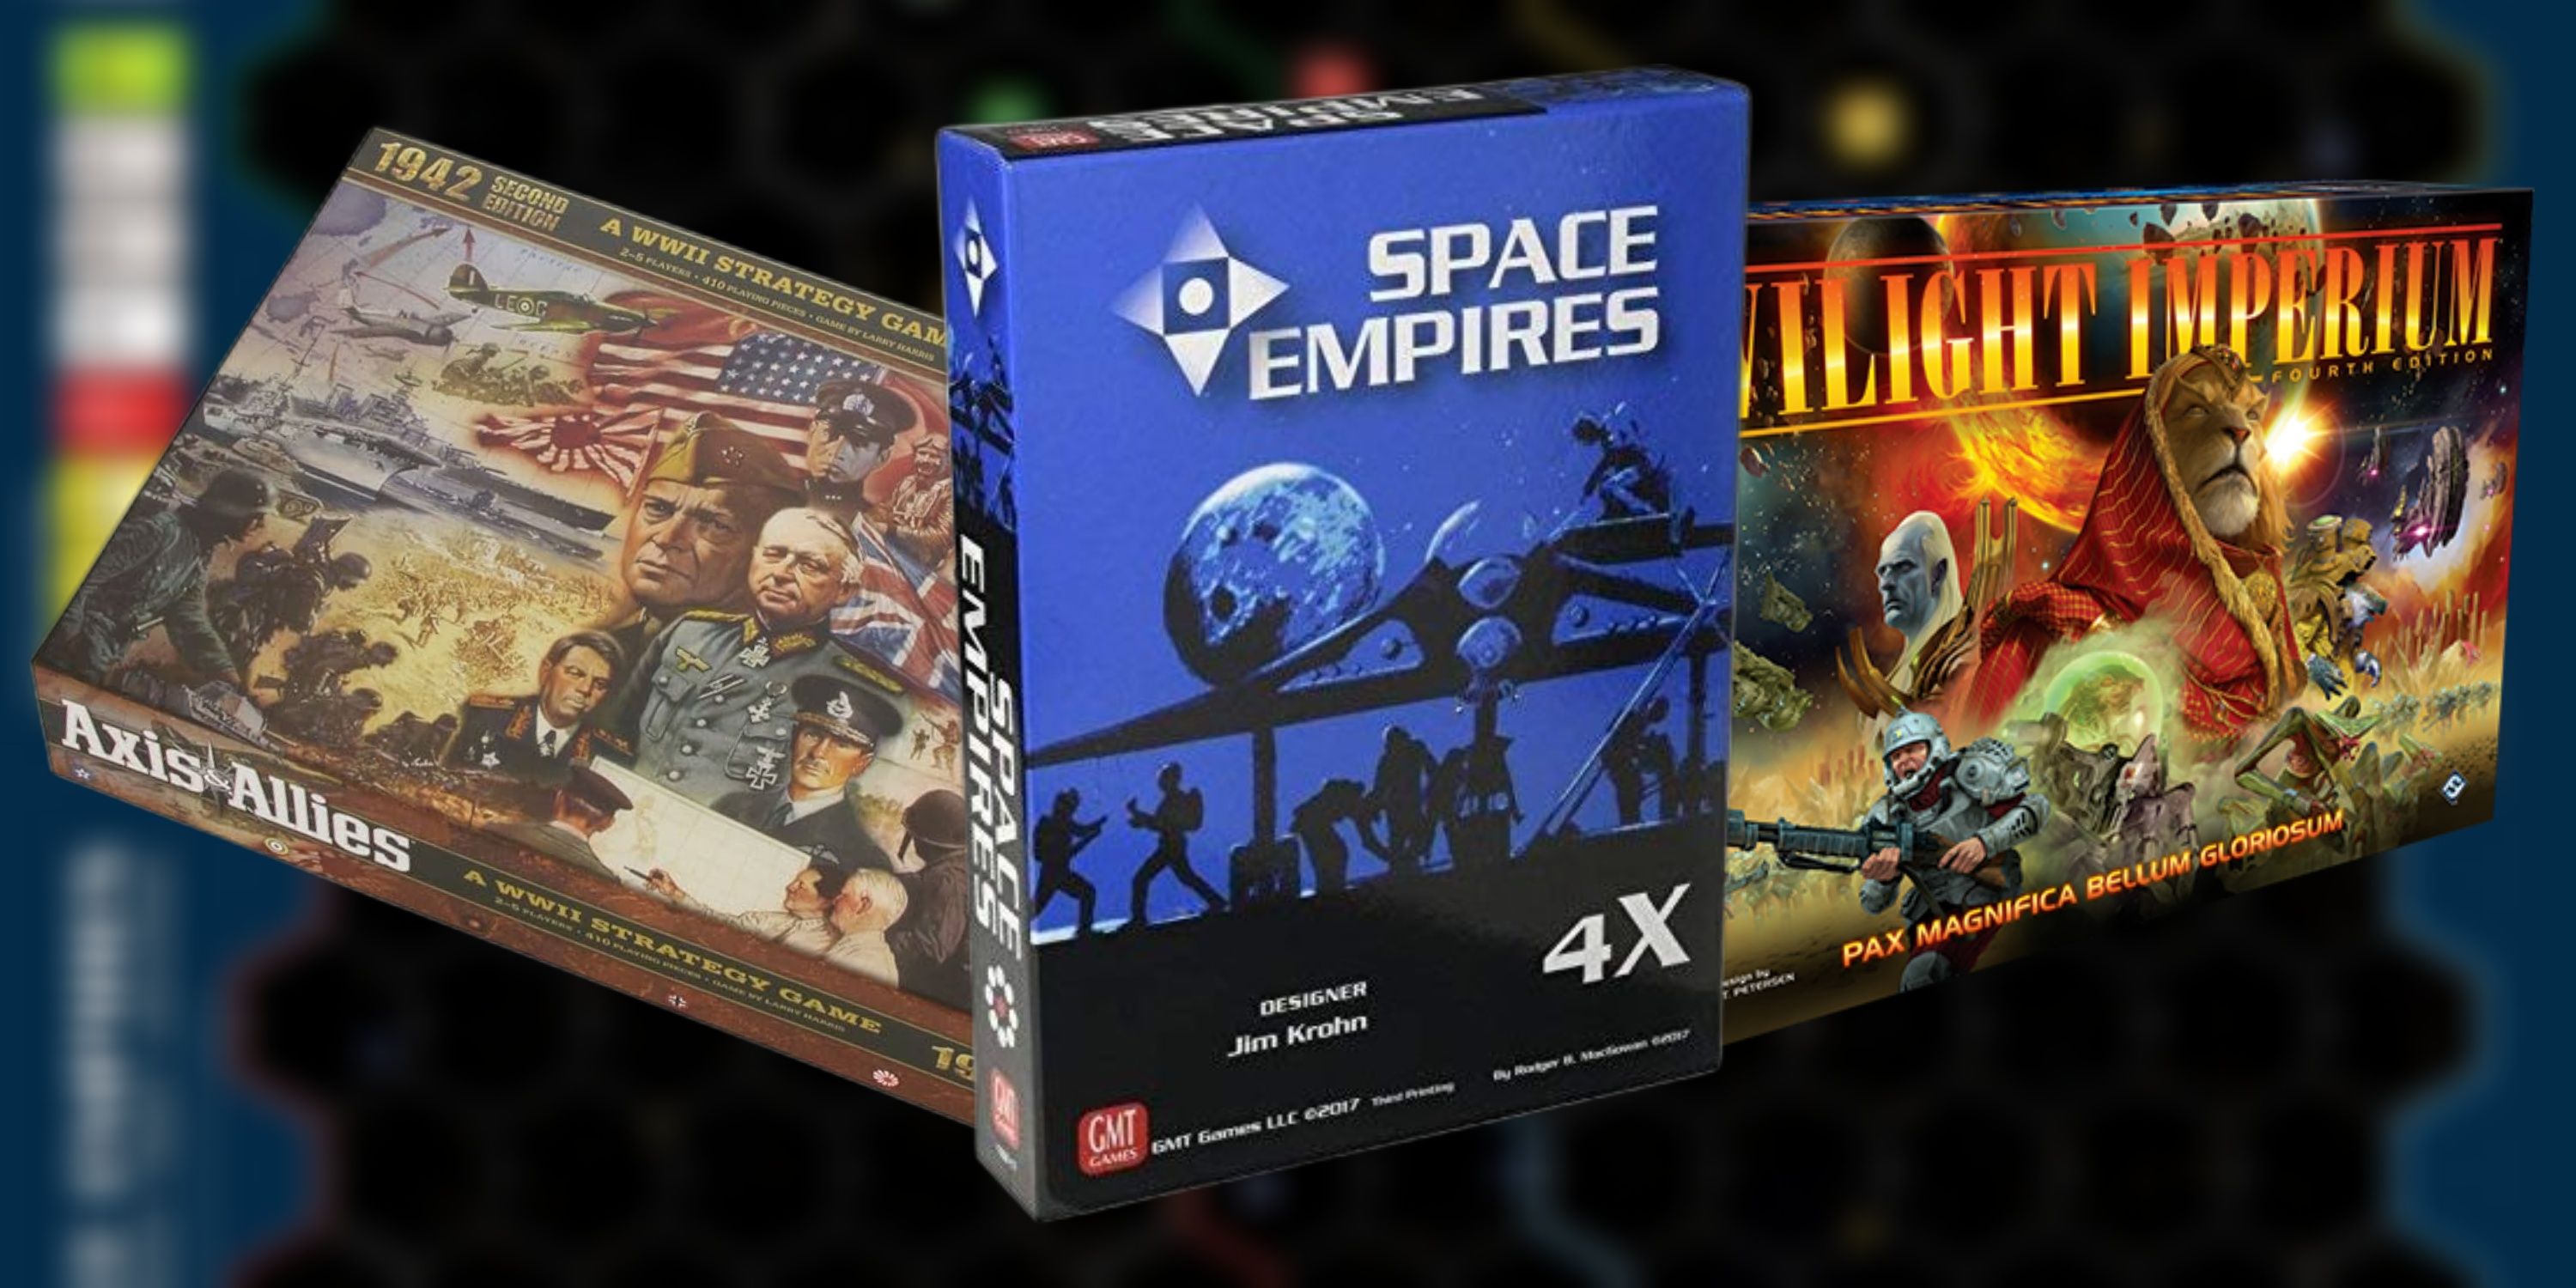 Best Grand Strategy Board Games (Featured Image) - Axis & Allies + Space Empires 4X + Twilight Imperium on Space Empires 4X blurred background